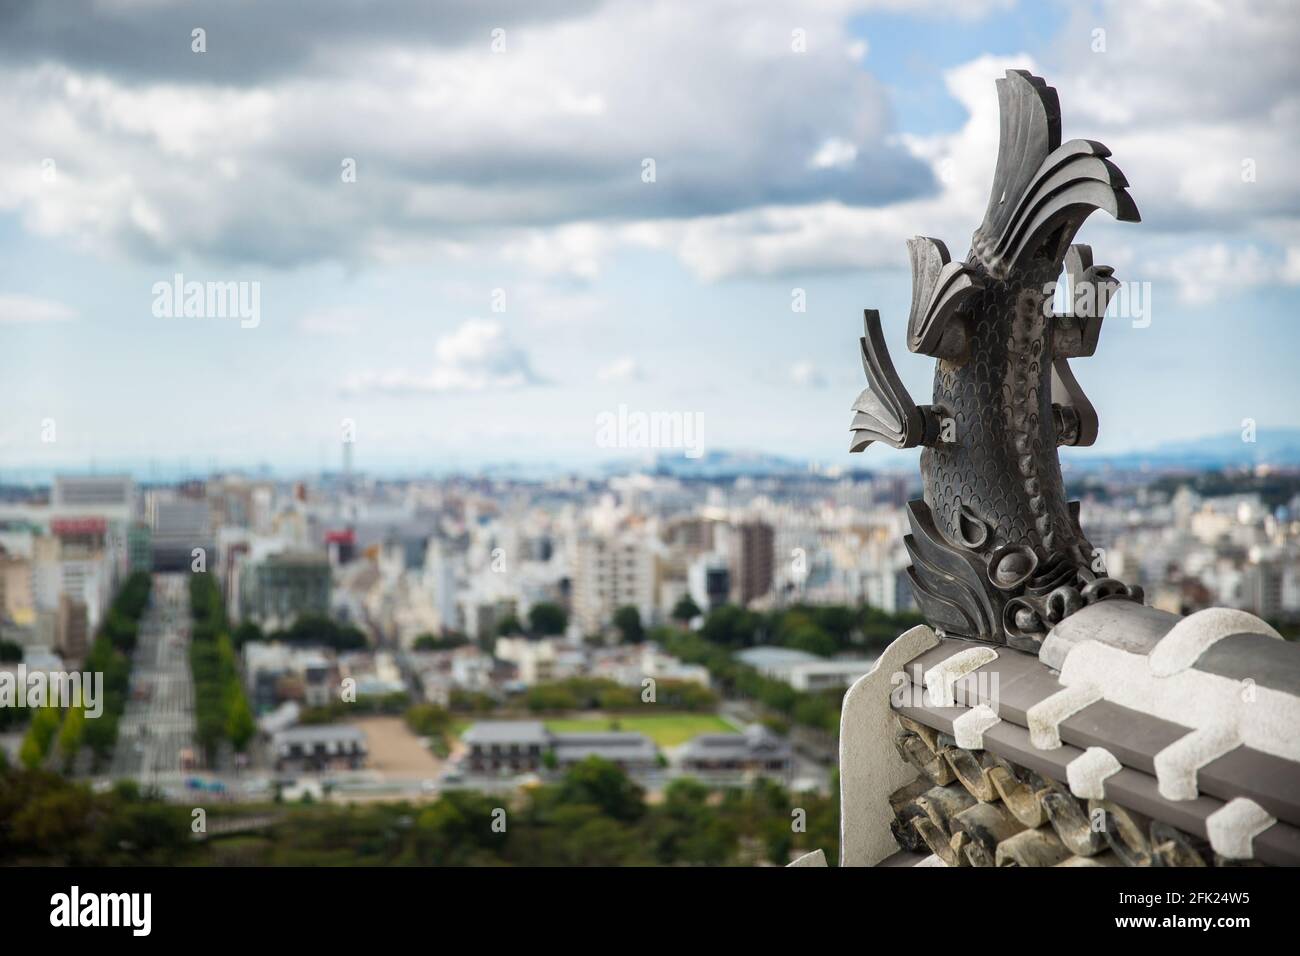 Koi carp Tiger headed fish statue on roof top of Himeji Castle with view of Himeji City (soft focus), Japan Stock Photo